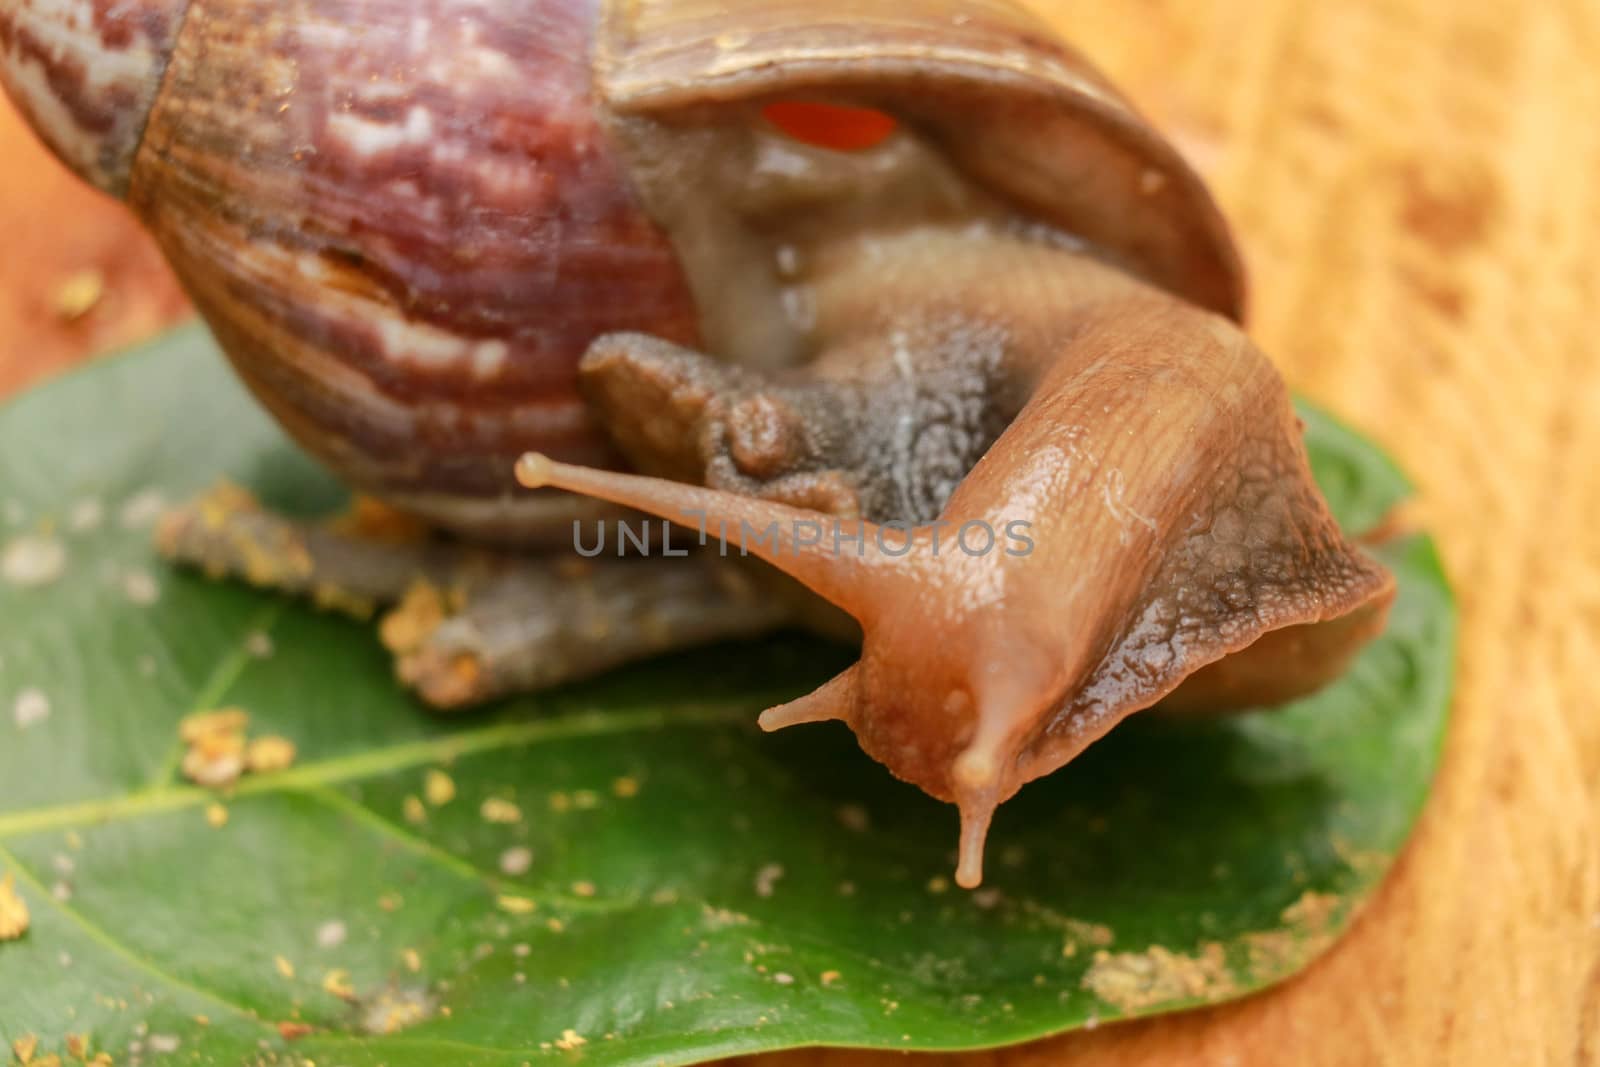 Giant African Land Snail - Achatina fulica large land snail in Achatinidae, similar to Achatina achatina and Archachatina marginata, pest issues, invasive species of snail.